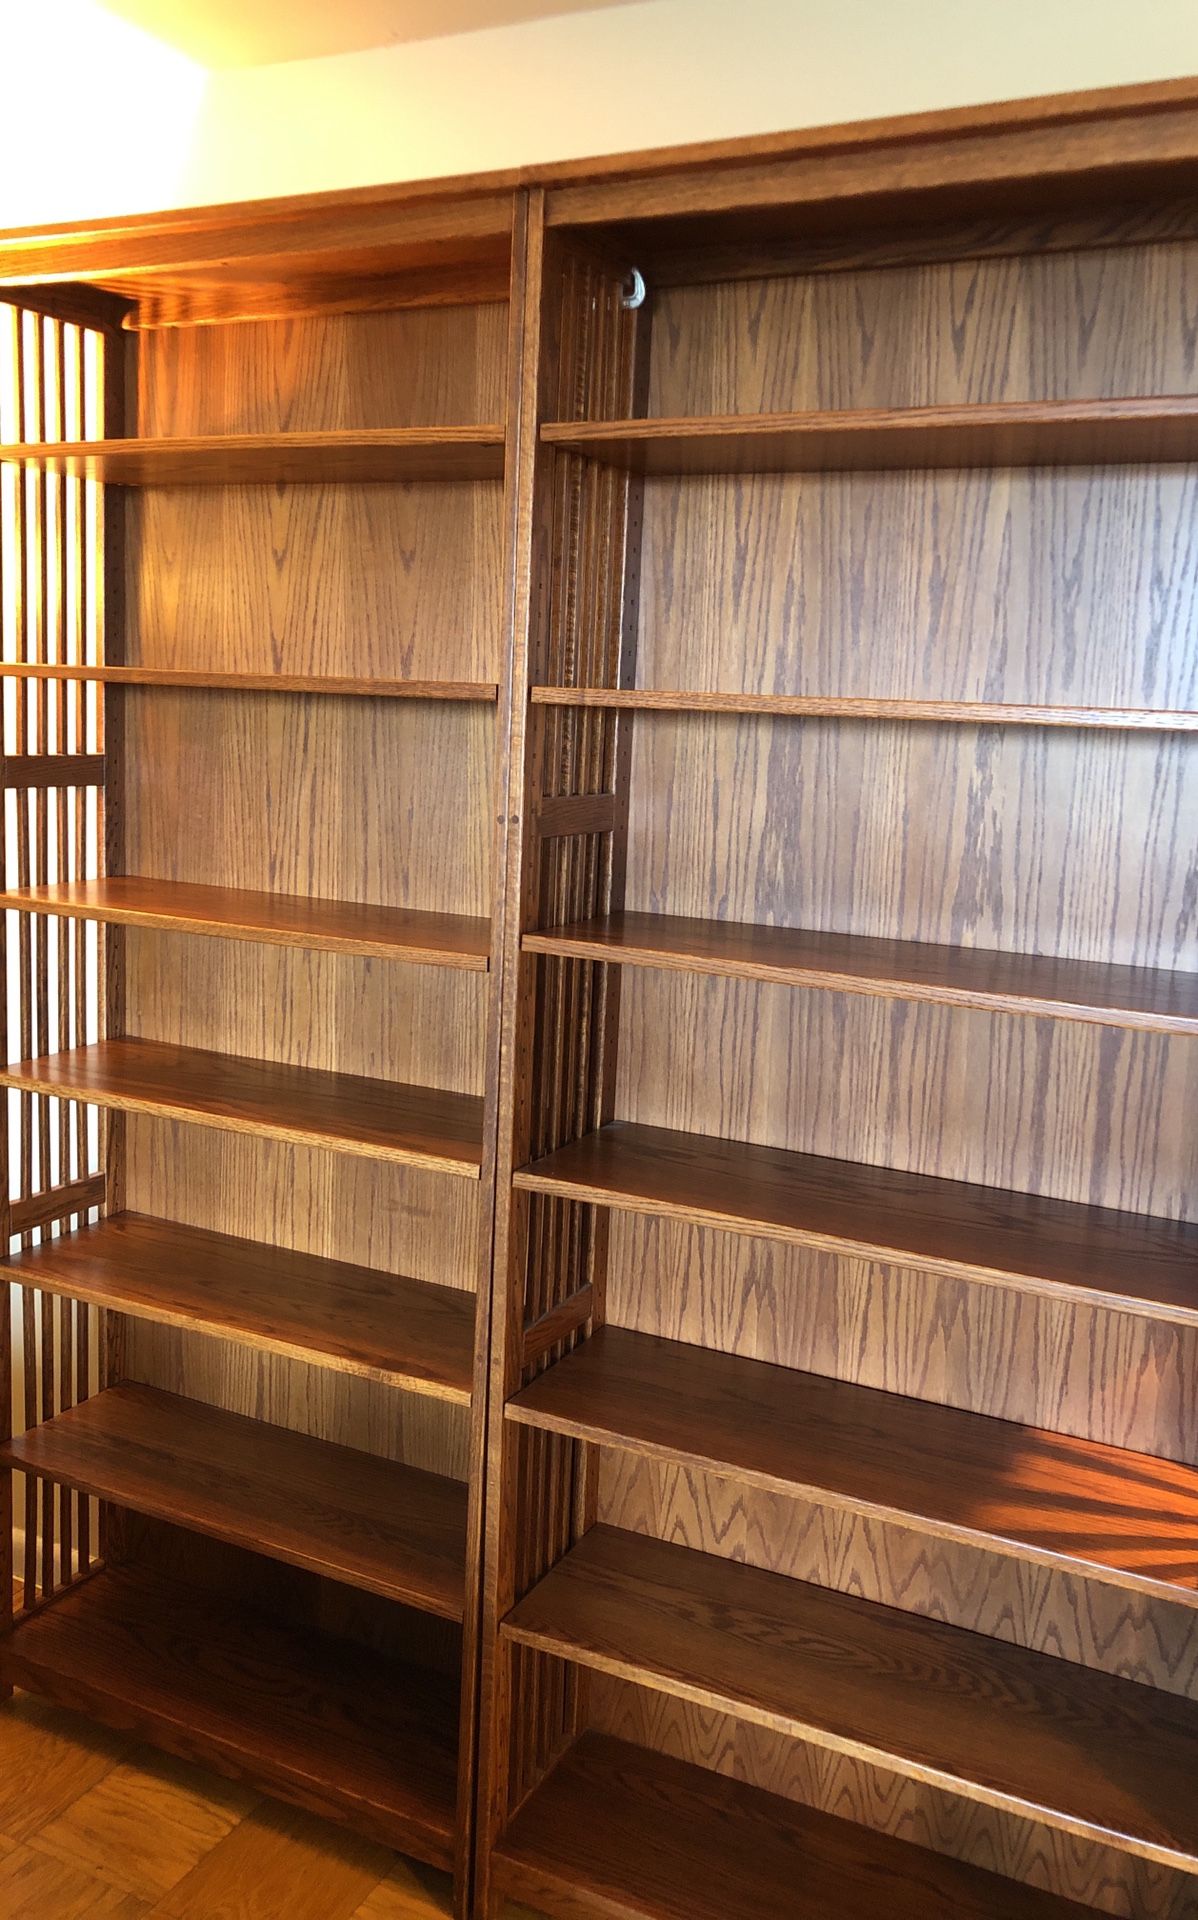 Mission-style 7’ bookcases.